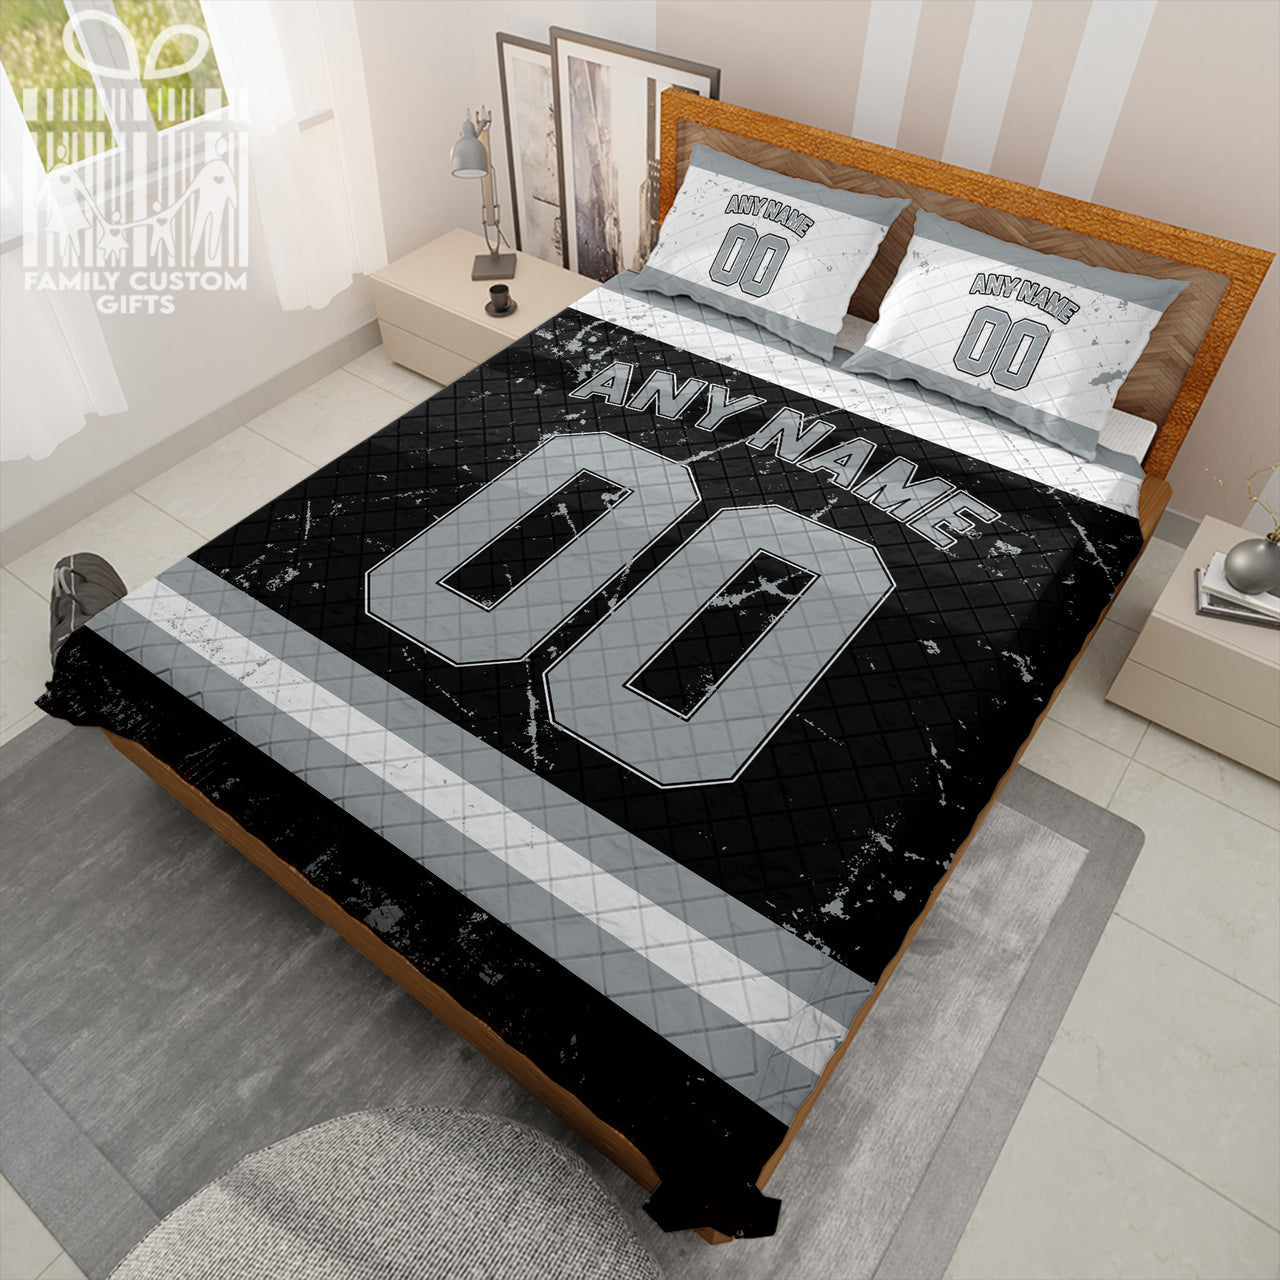 Custom Quilt Sets Los Angeles Jersey Personalized Ice hockey Premium Quilt Bedding for Men Women